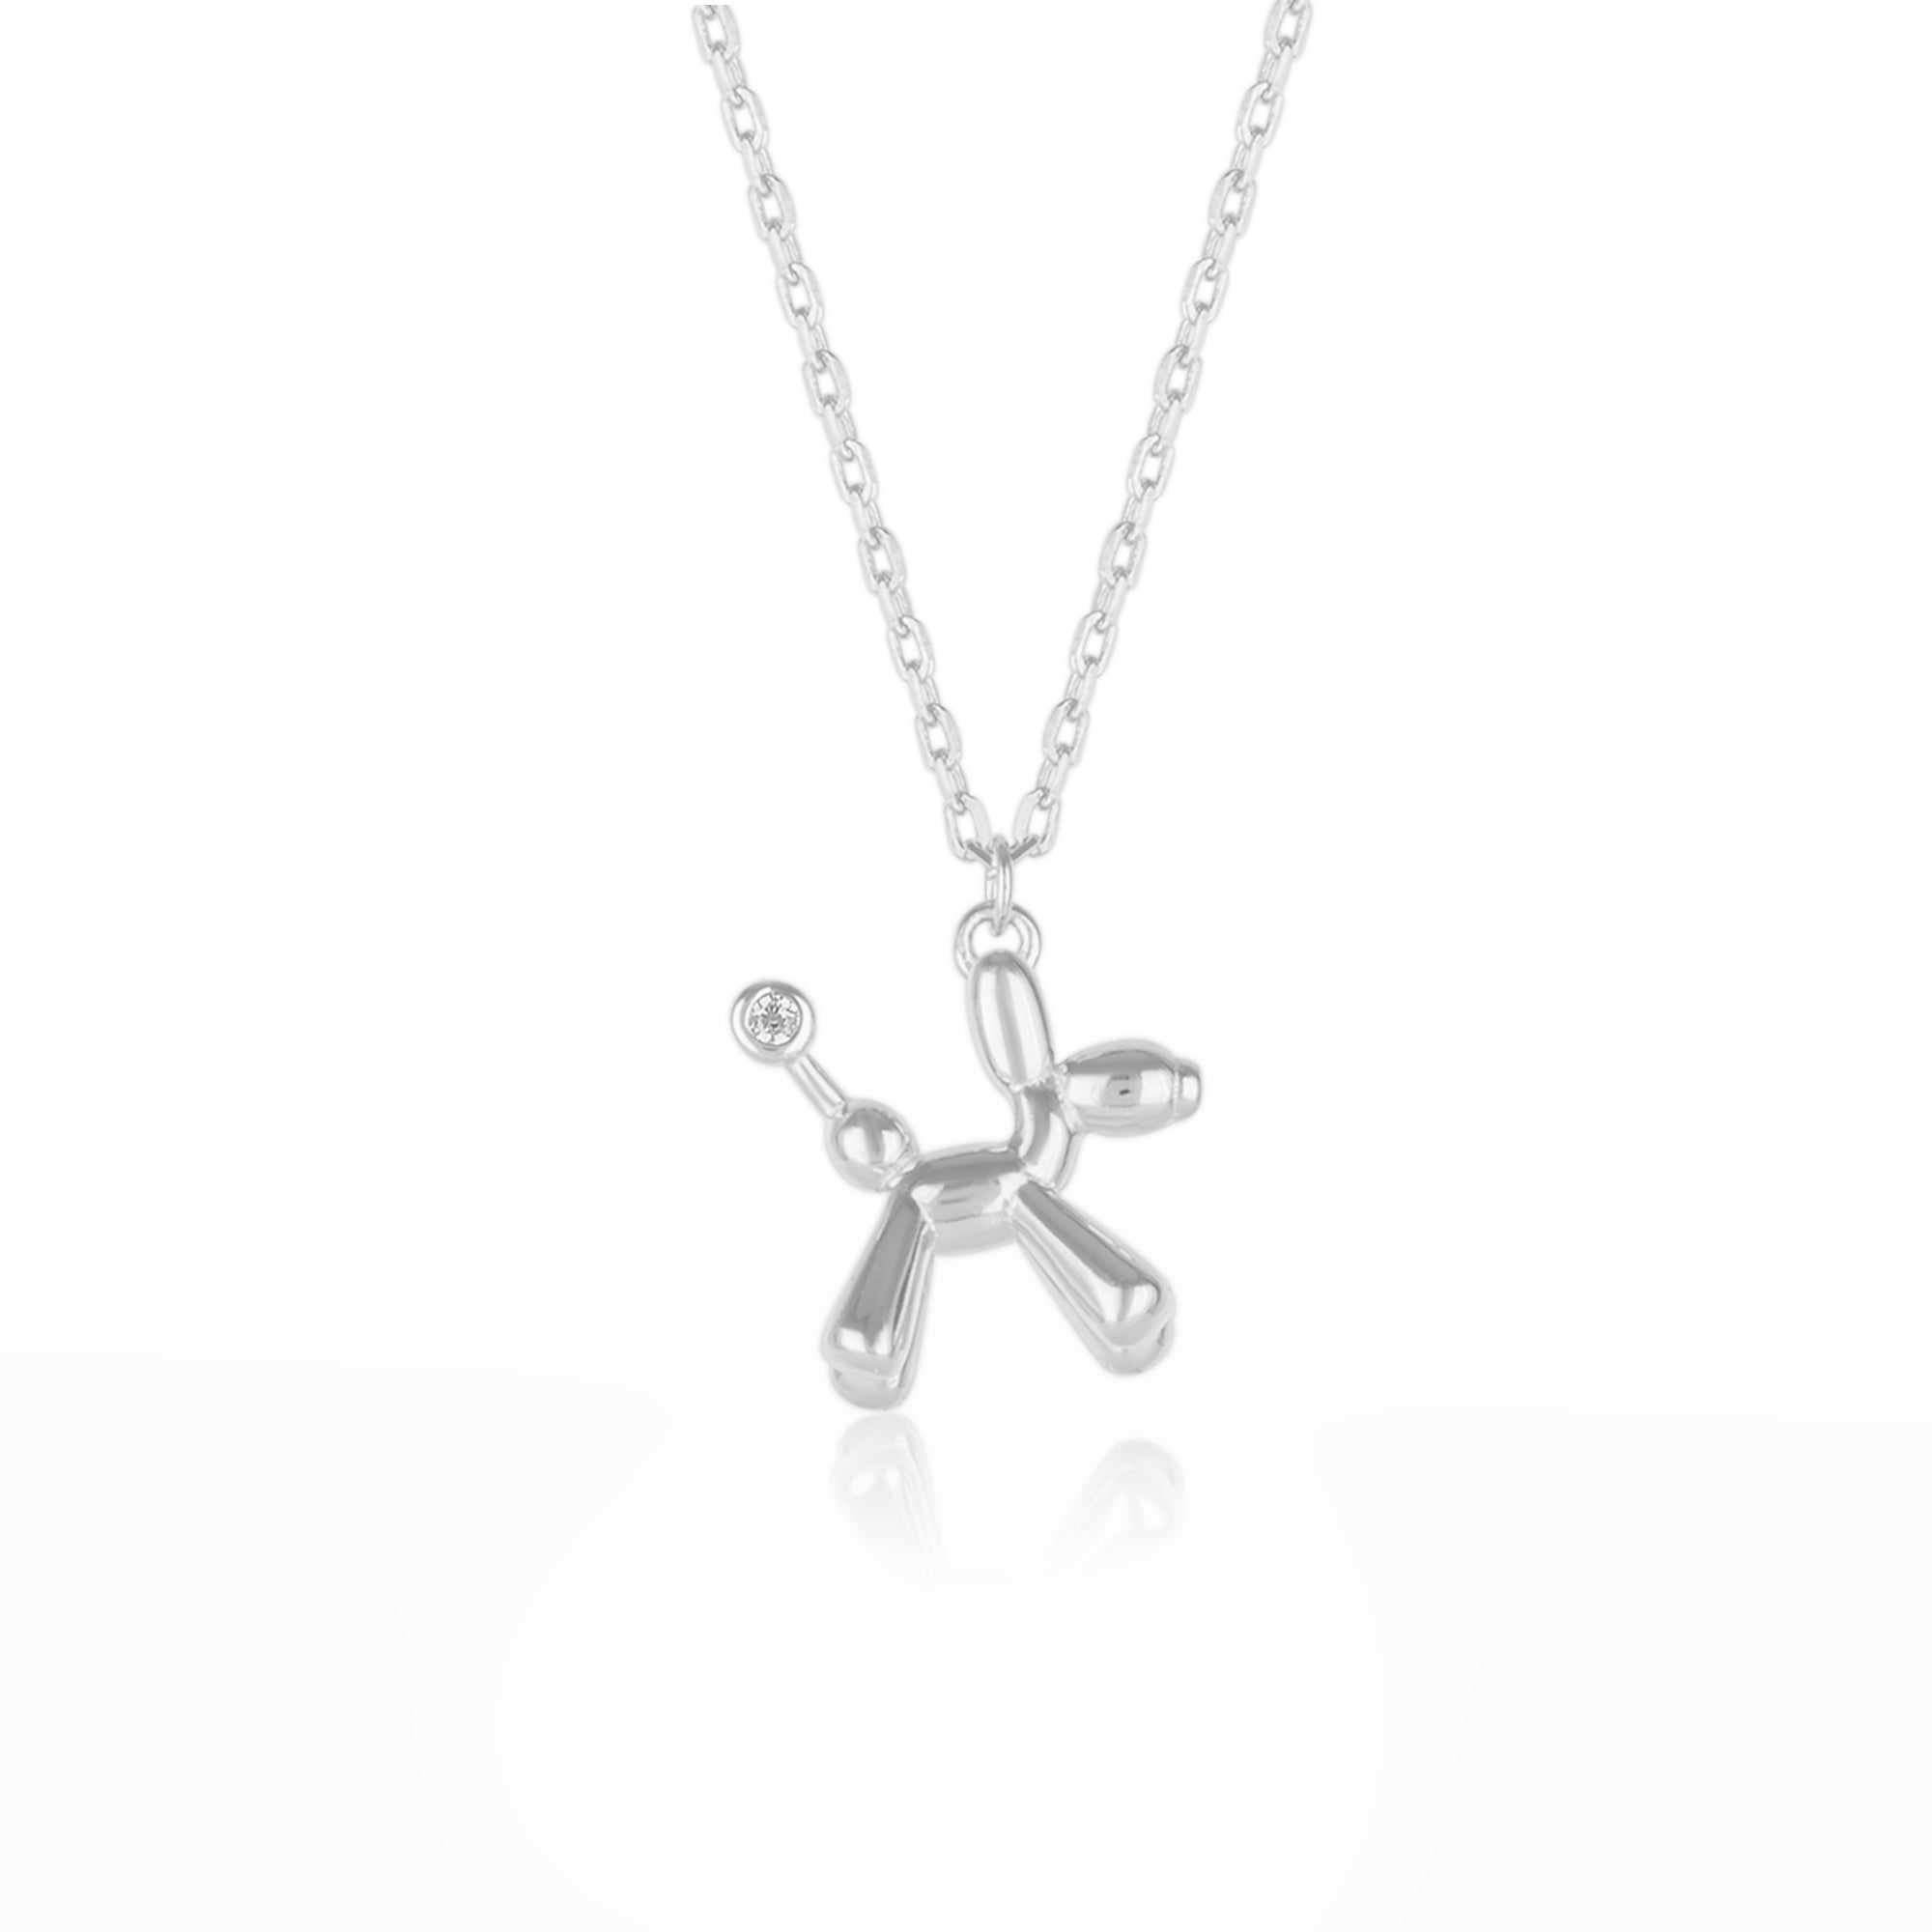 Balloon Dog Poodle Necklace in Sterling Silver